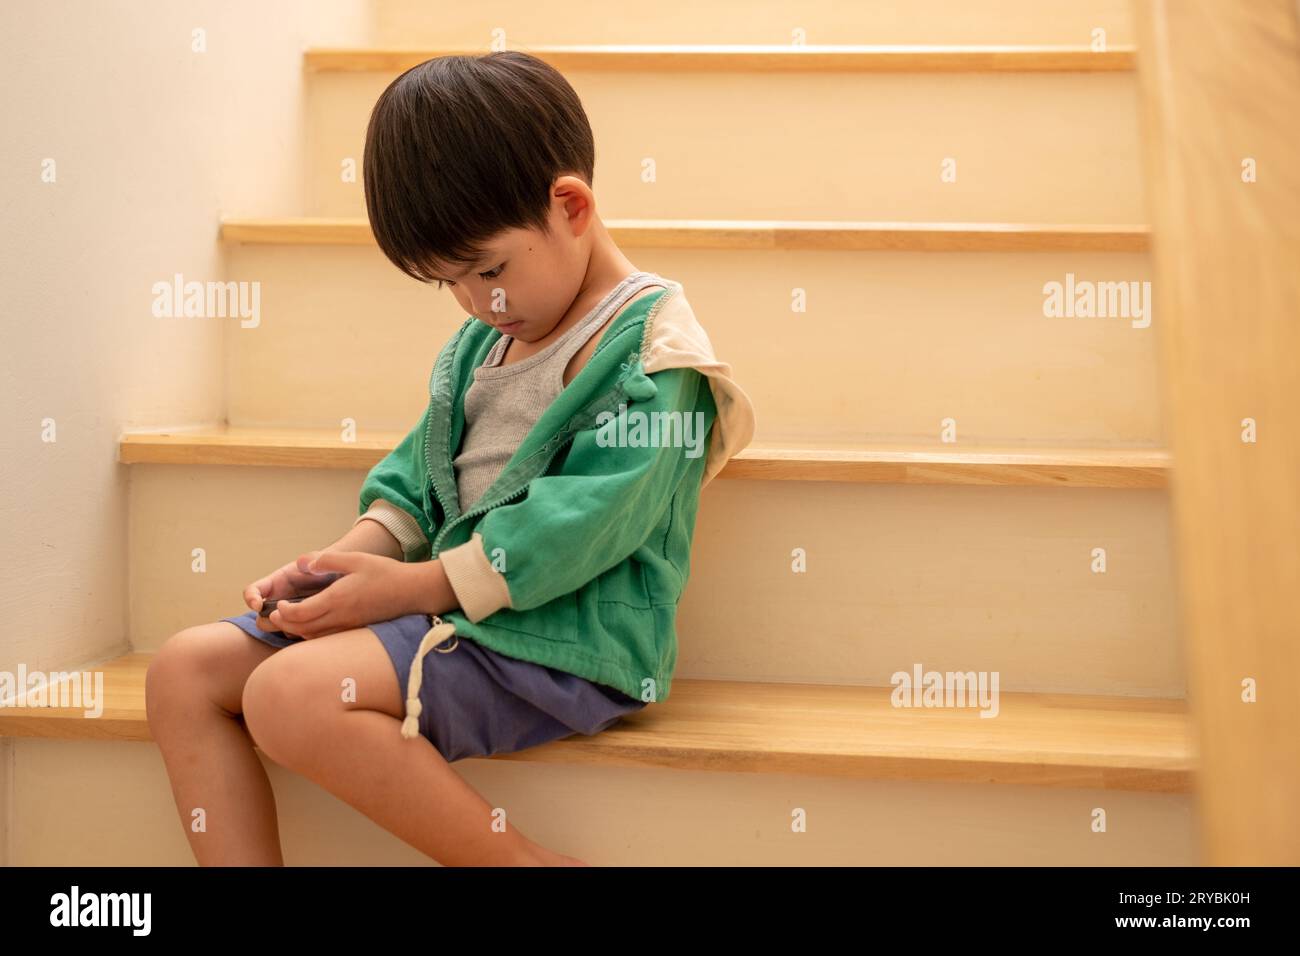 A boy who was scolded by his mother secretly came to play on the phone on the stairs. Stock Photo